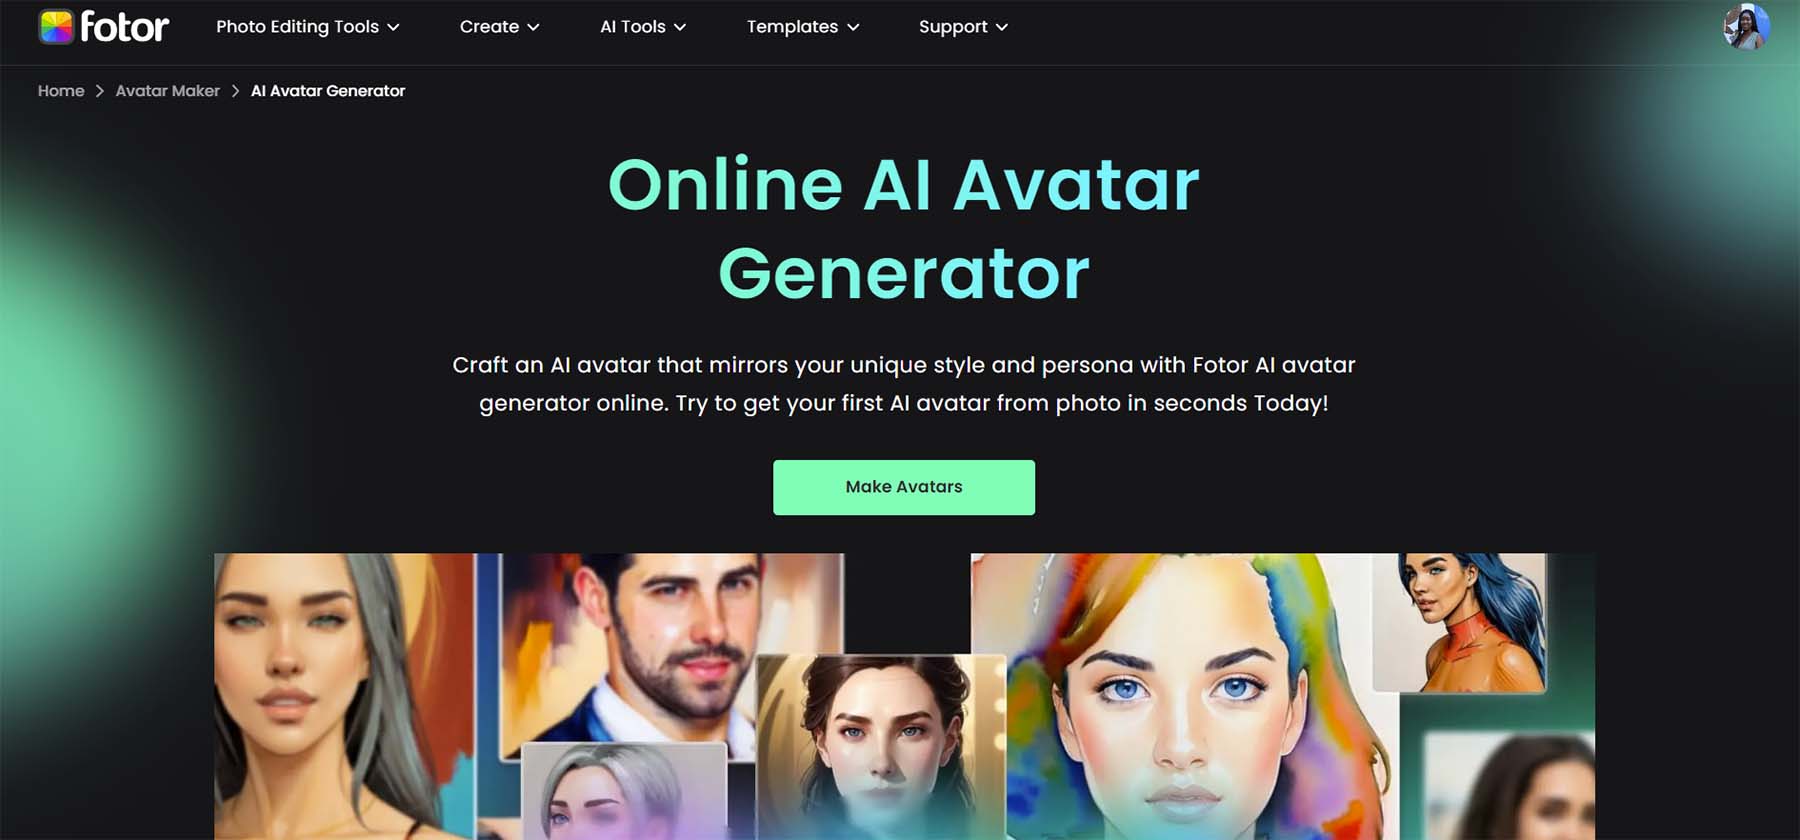 13 Amazing Free Avatar and Character Creator Apps